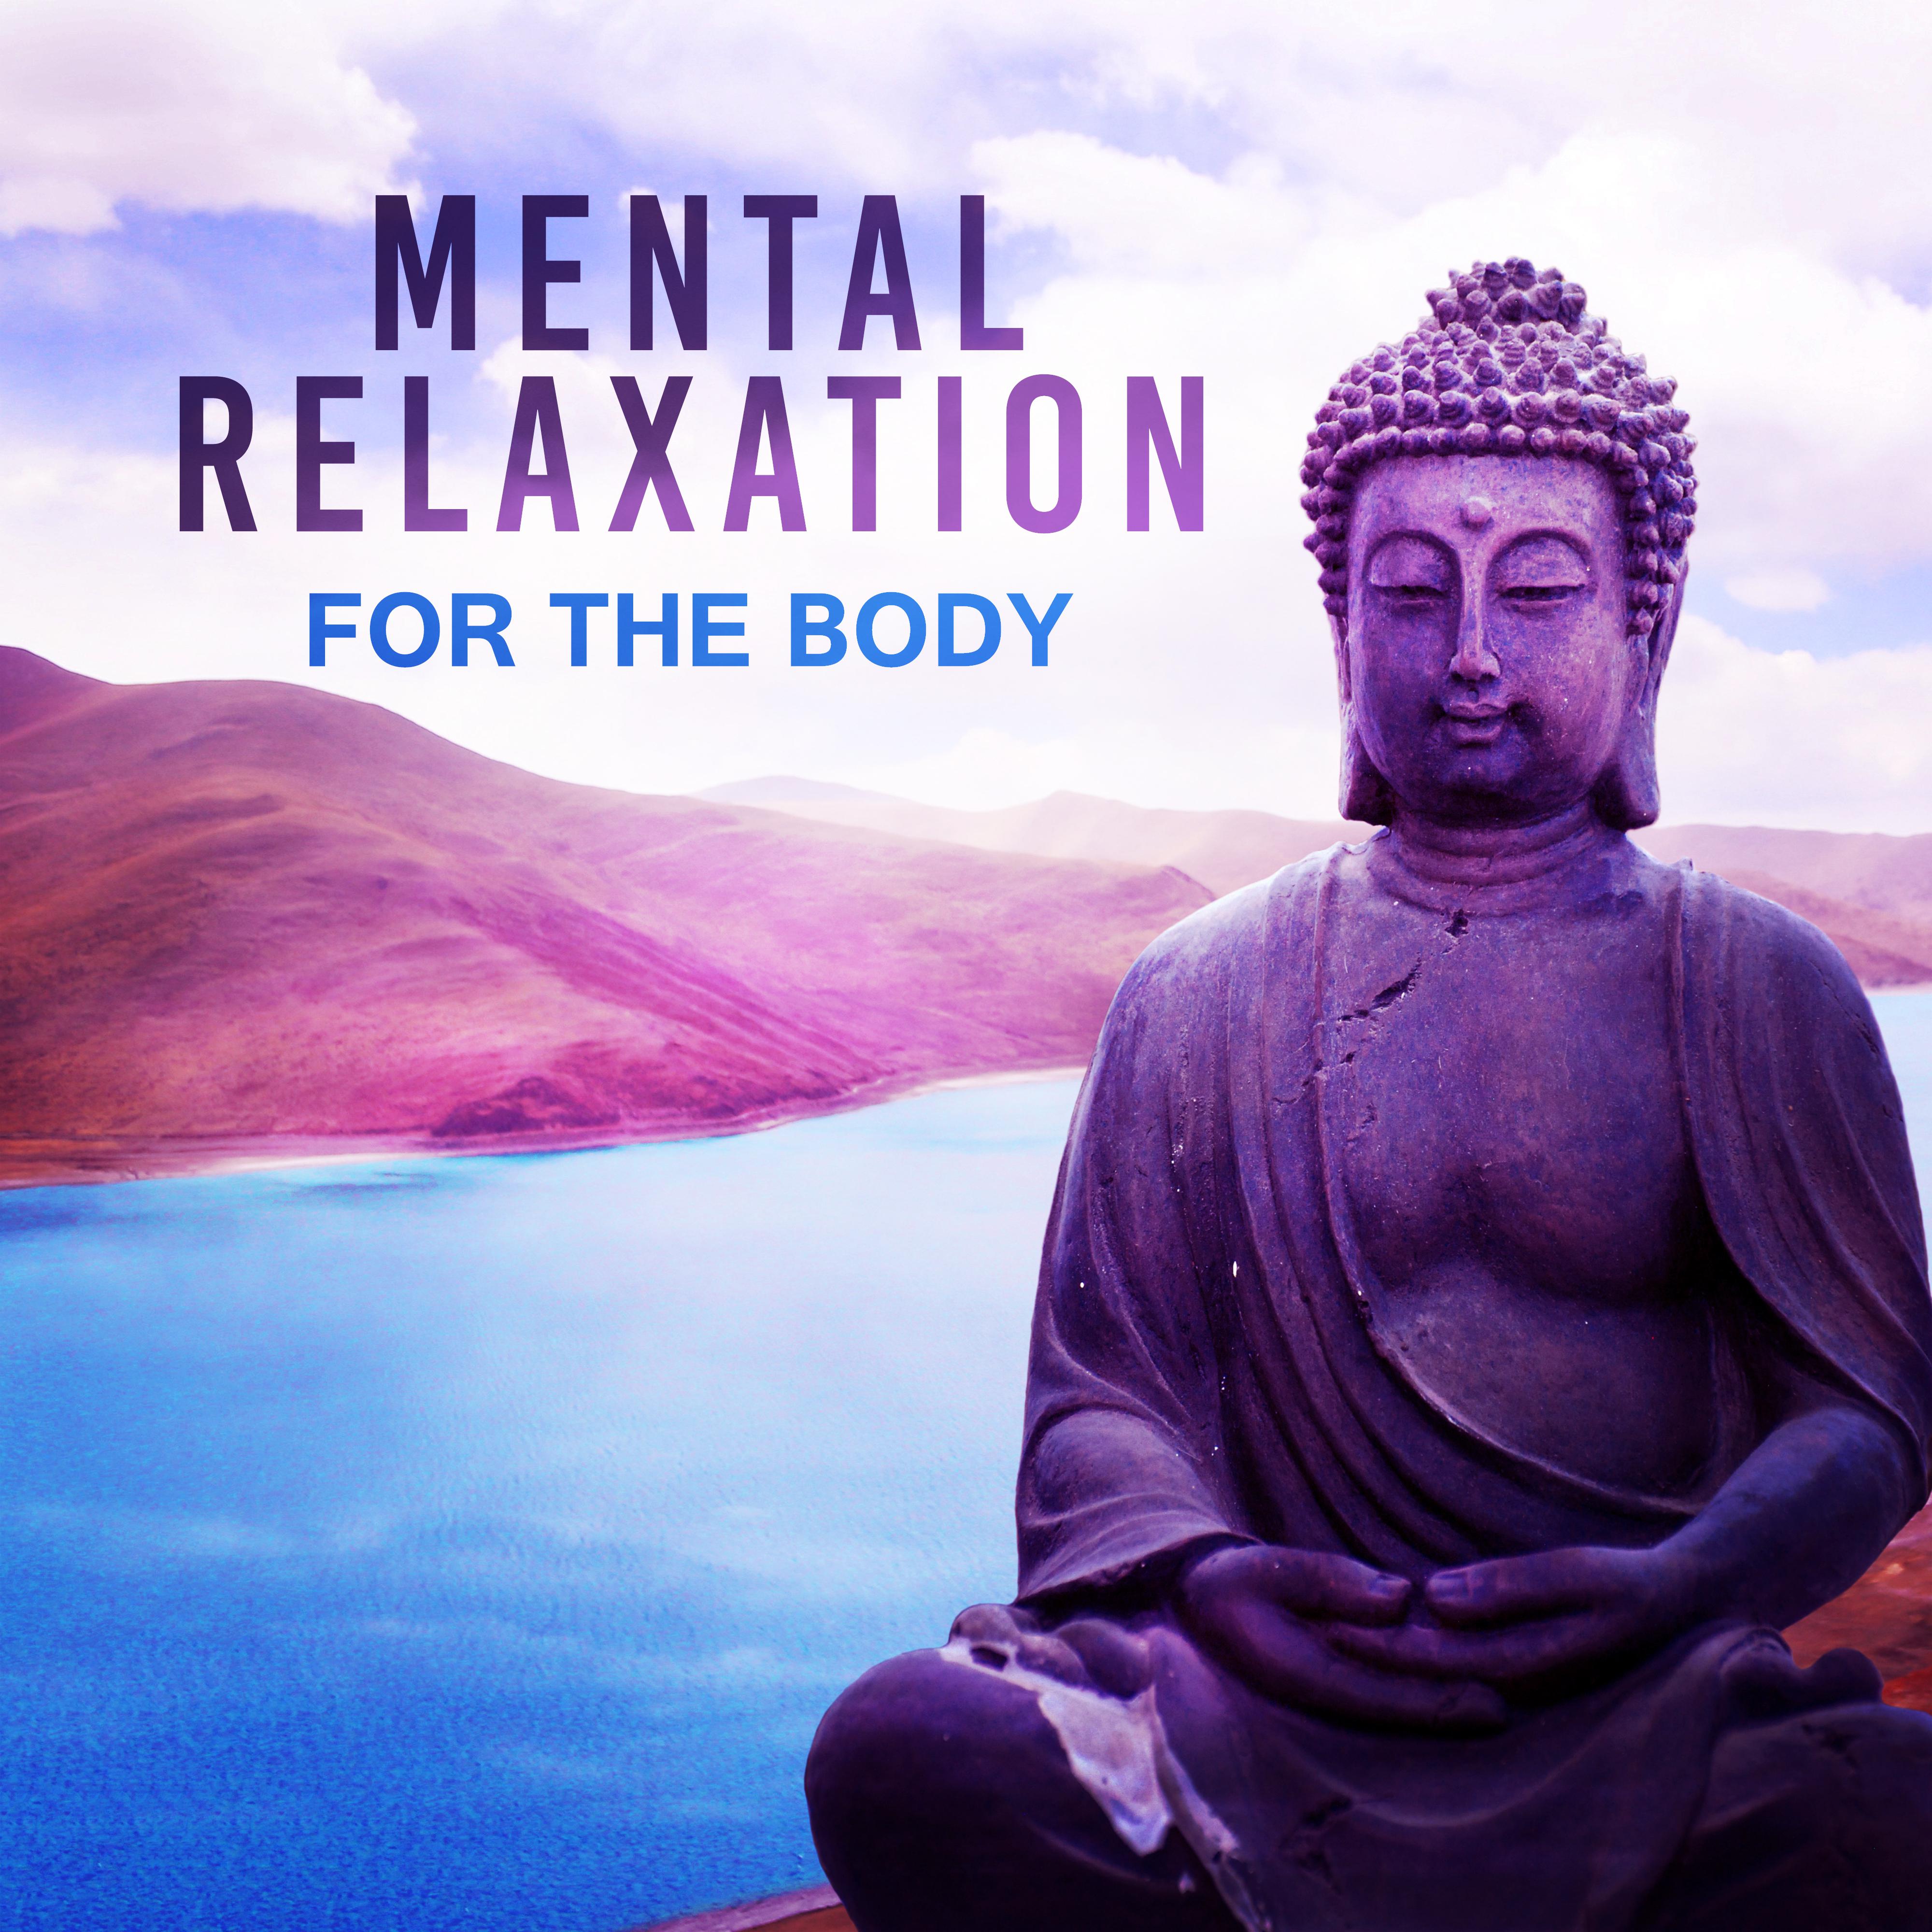 Mental Relaxation For The Body – New Age for Meditation, Yoga, Zen, Relaxation, Relaxing Music Therapy, Mental Health